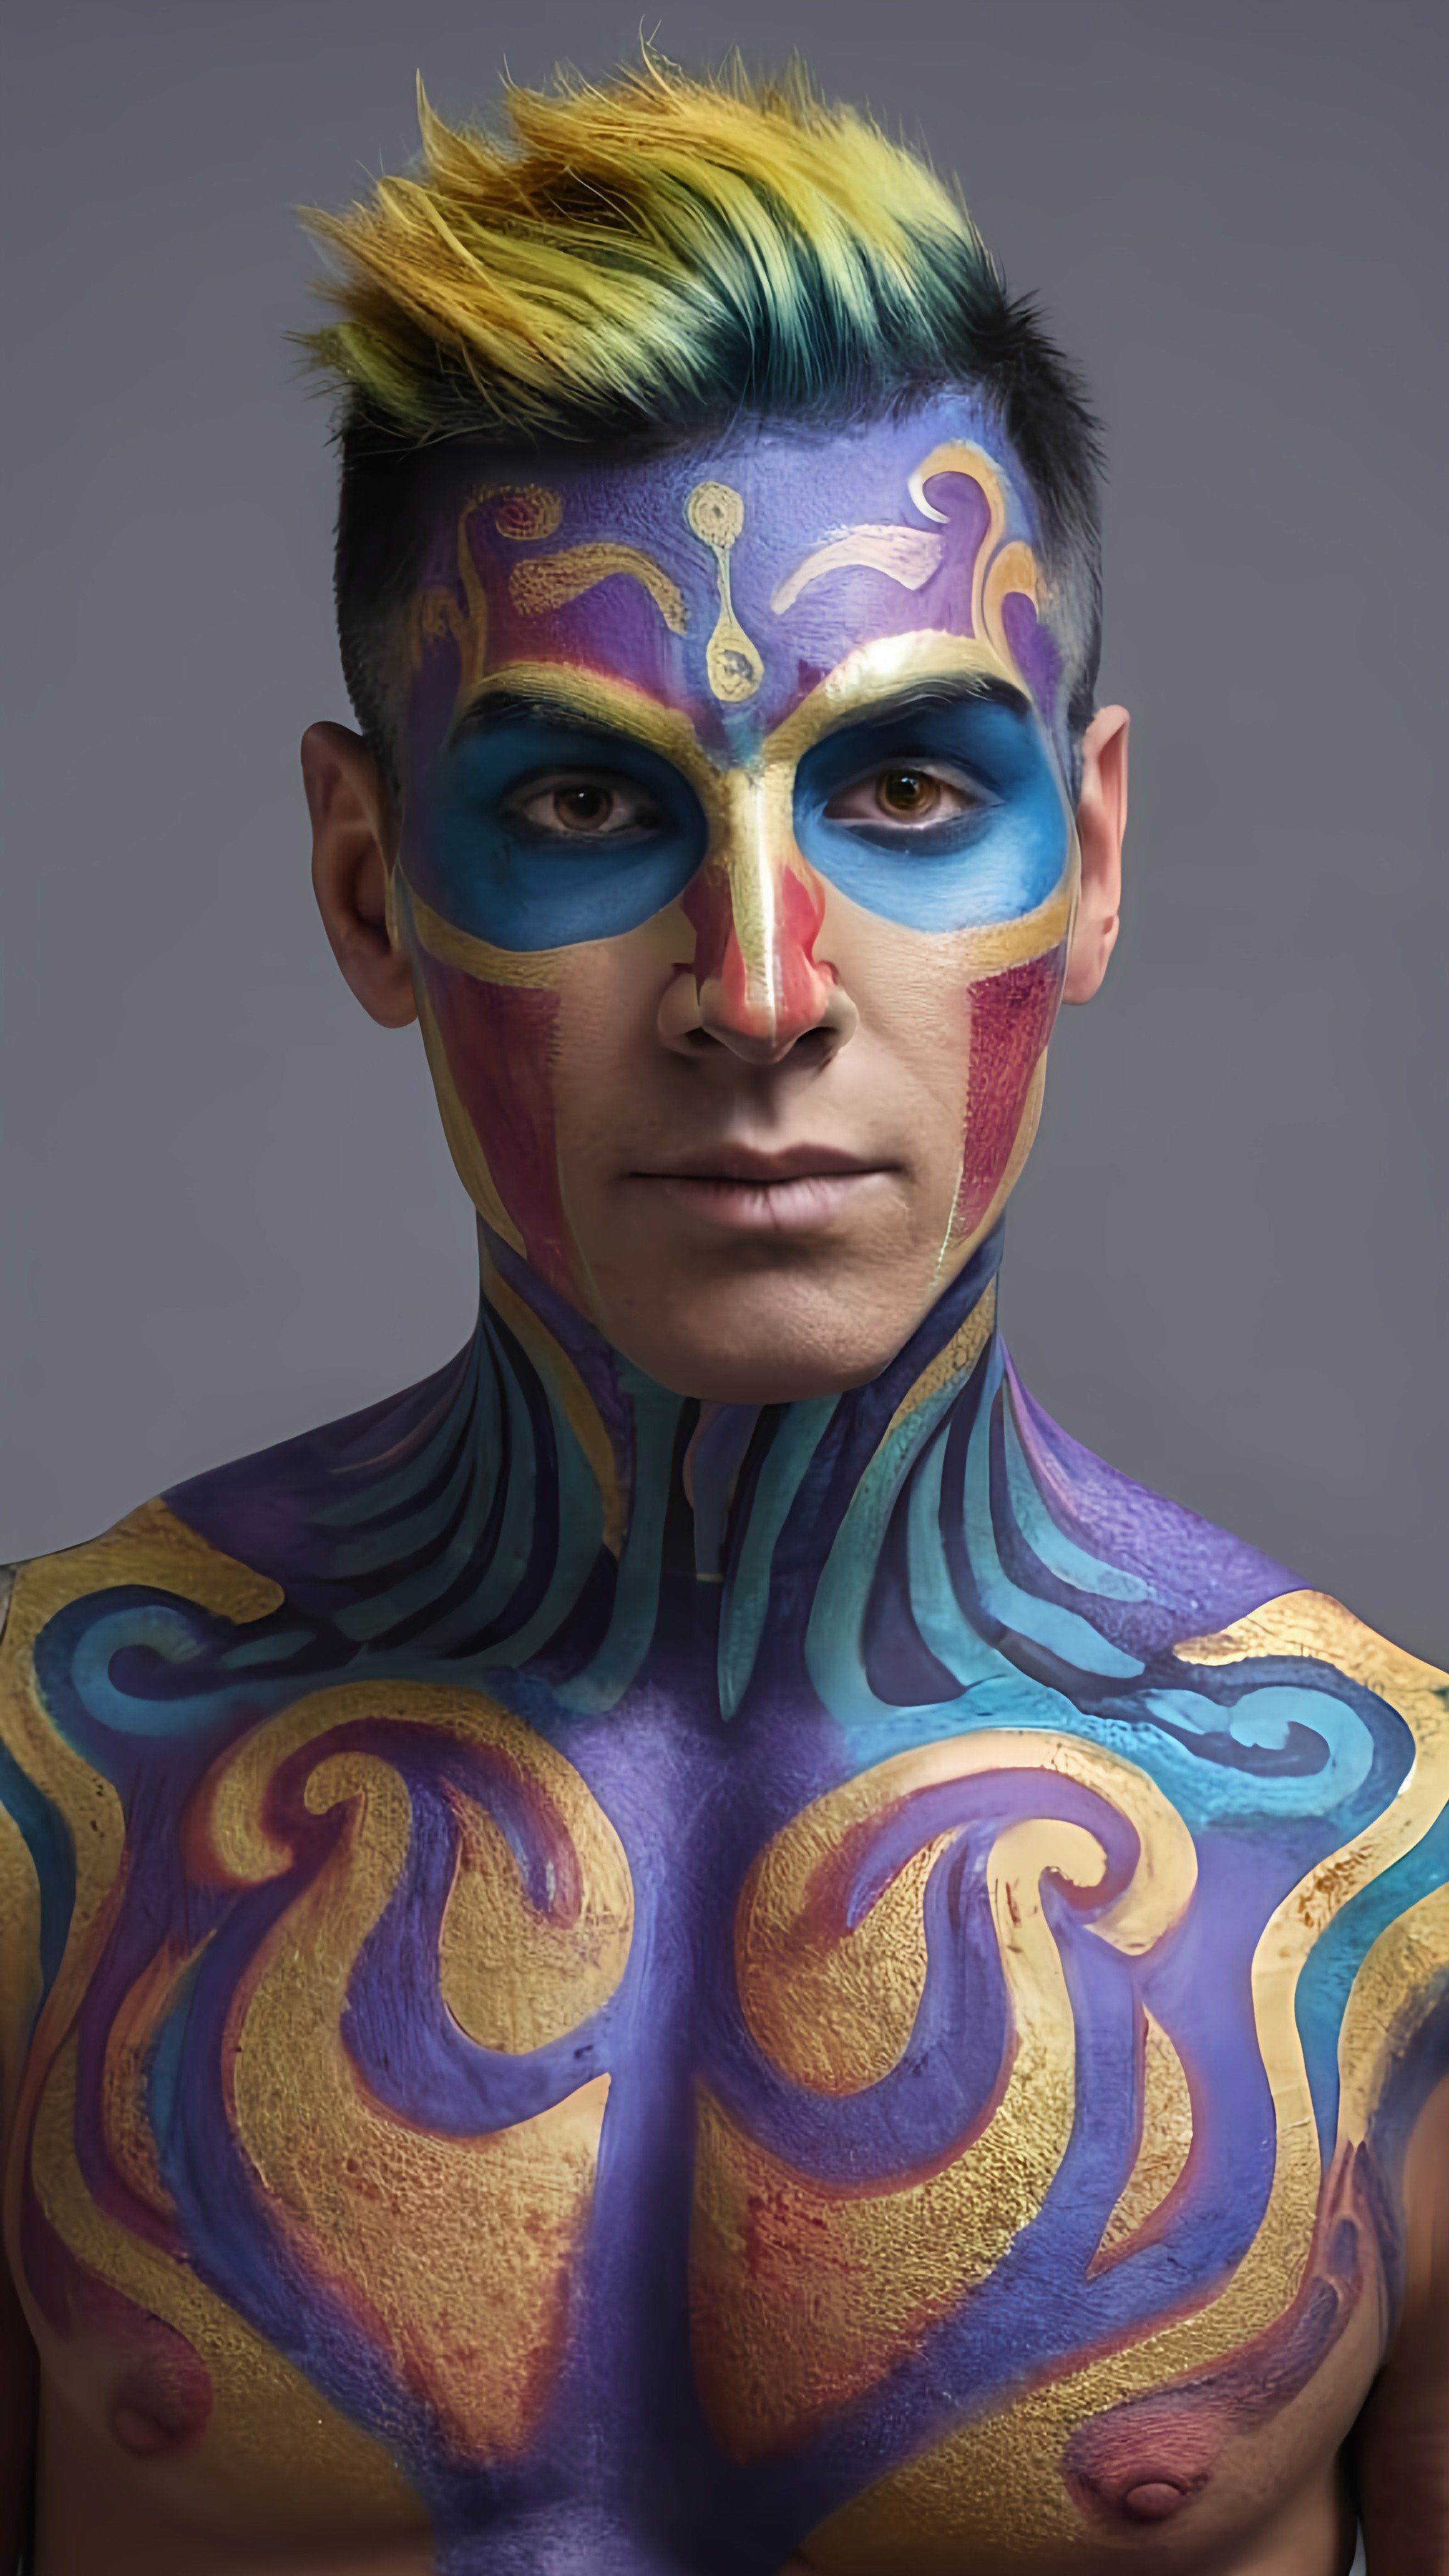 Prompt: a man with a colorful face and body paint on his face and chest, with a yellow and blue swirl on his face, cloisonnism, painted